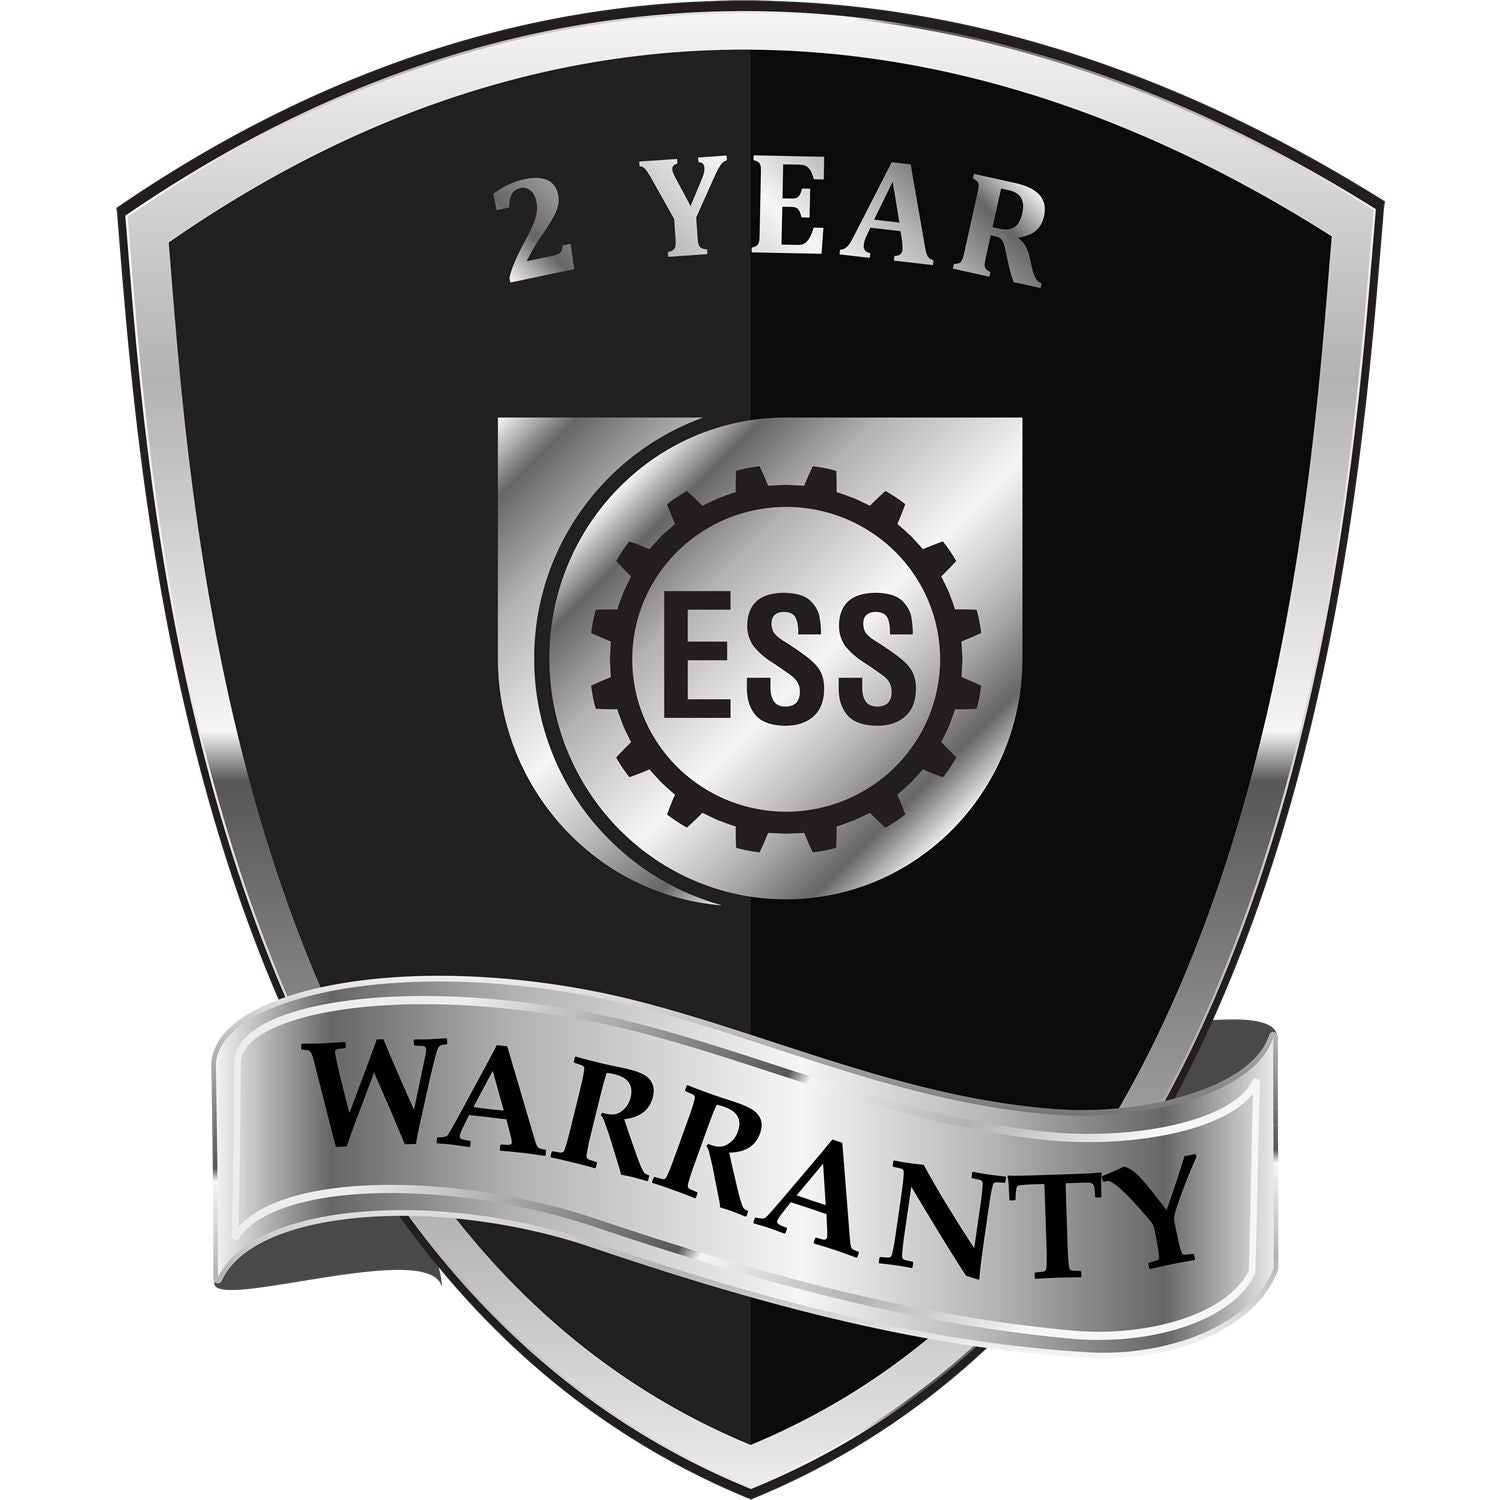 A badge or emblem showing a warranty icon for the Extended Long Reach Virginia Surveyor Embosser